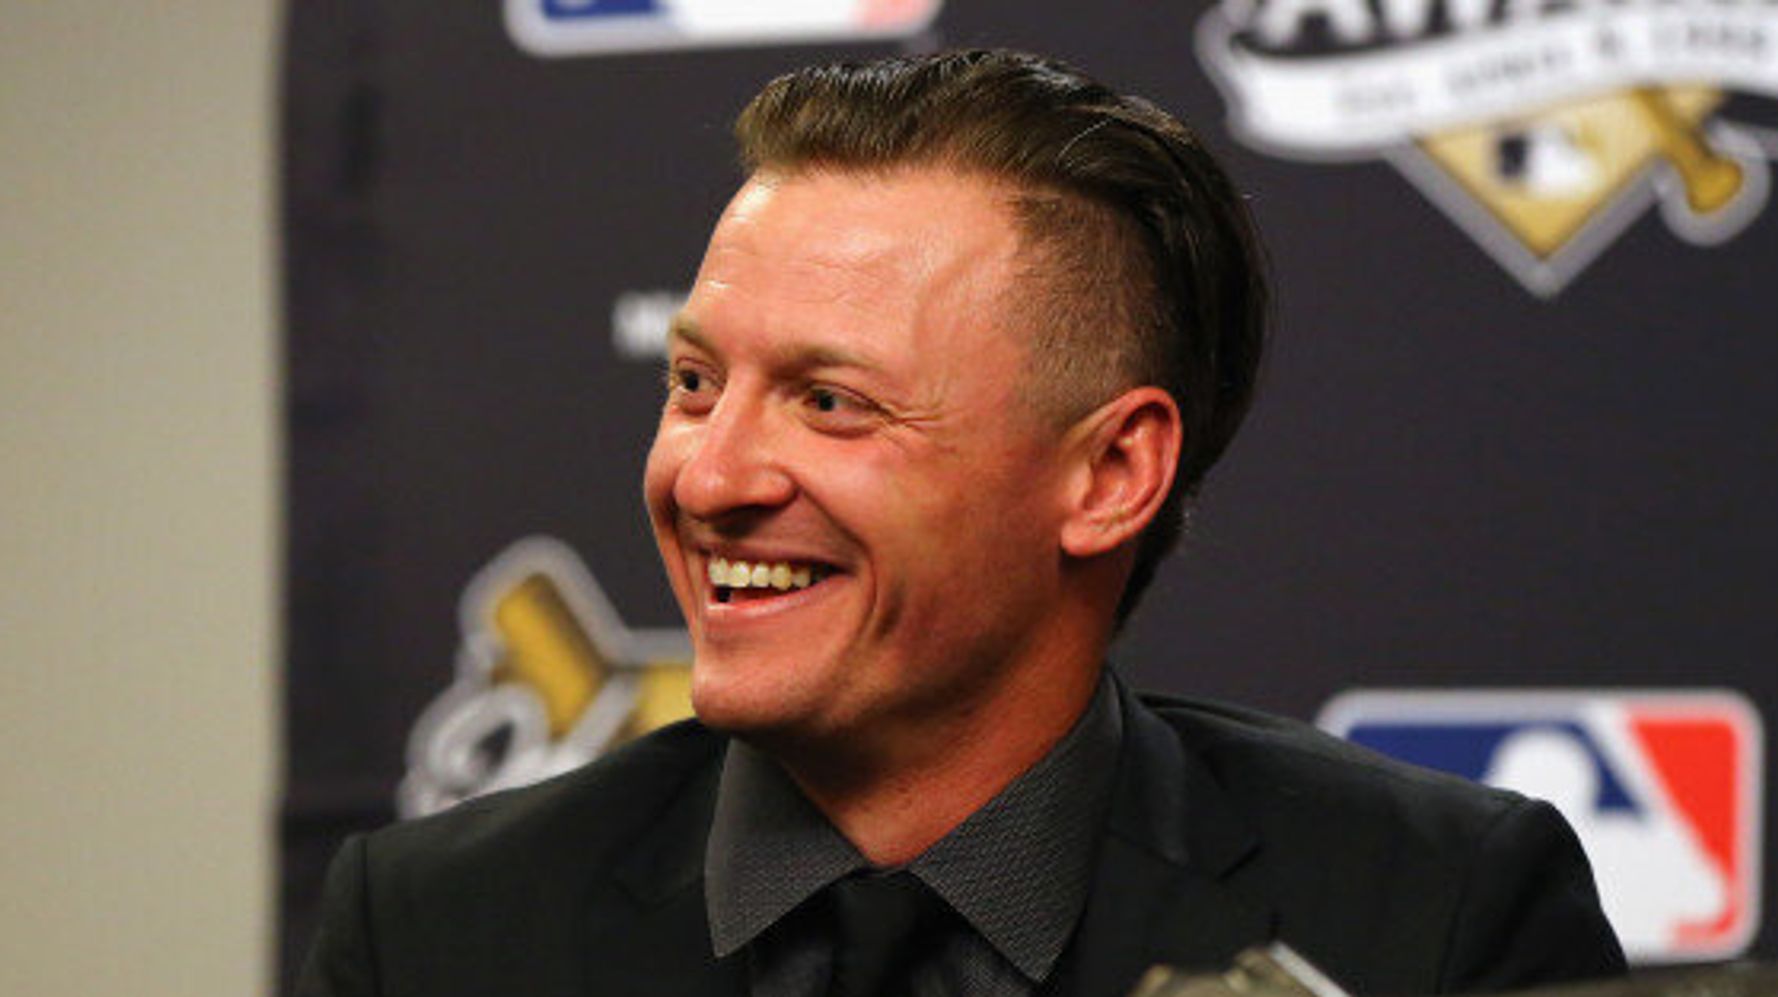 Josh Donaldson rocks new Viking-inspired hairstyle that sort of looks like  a french braid